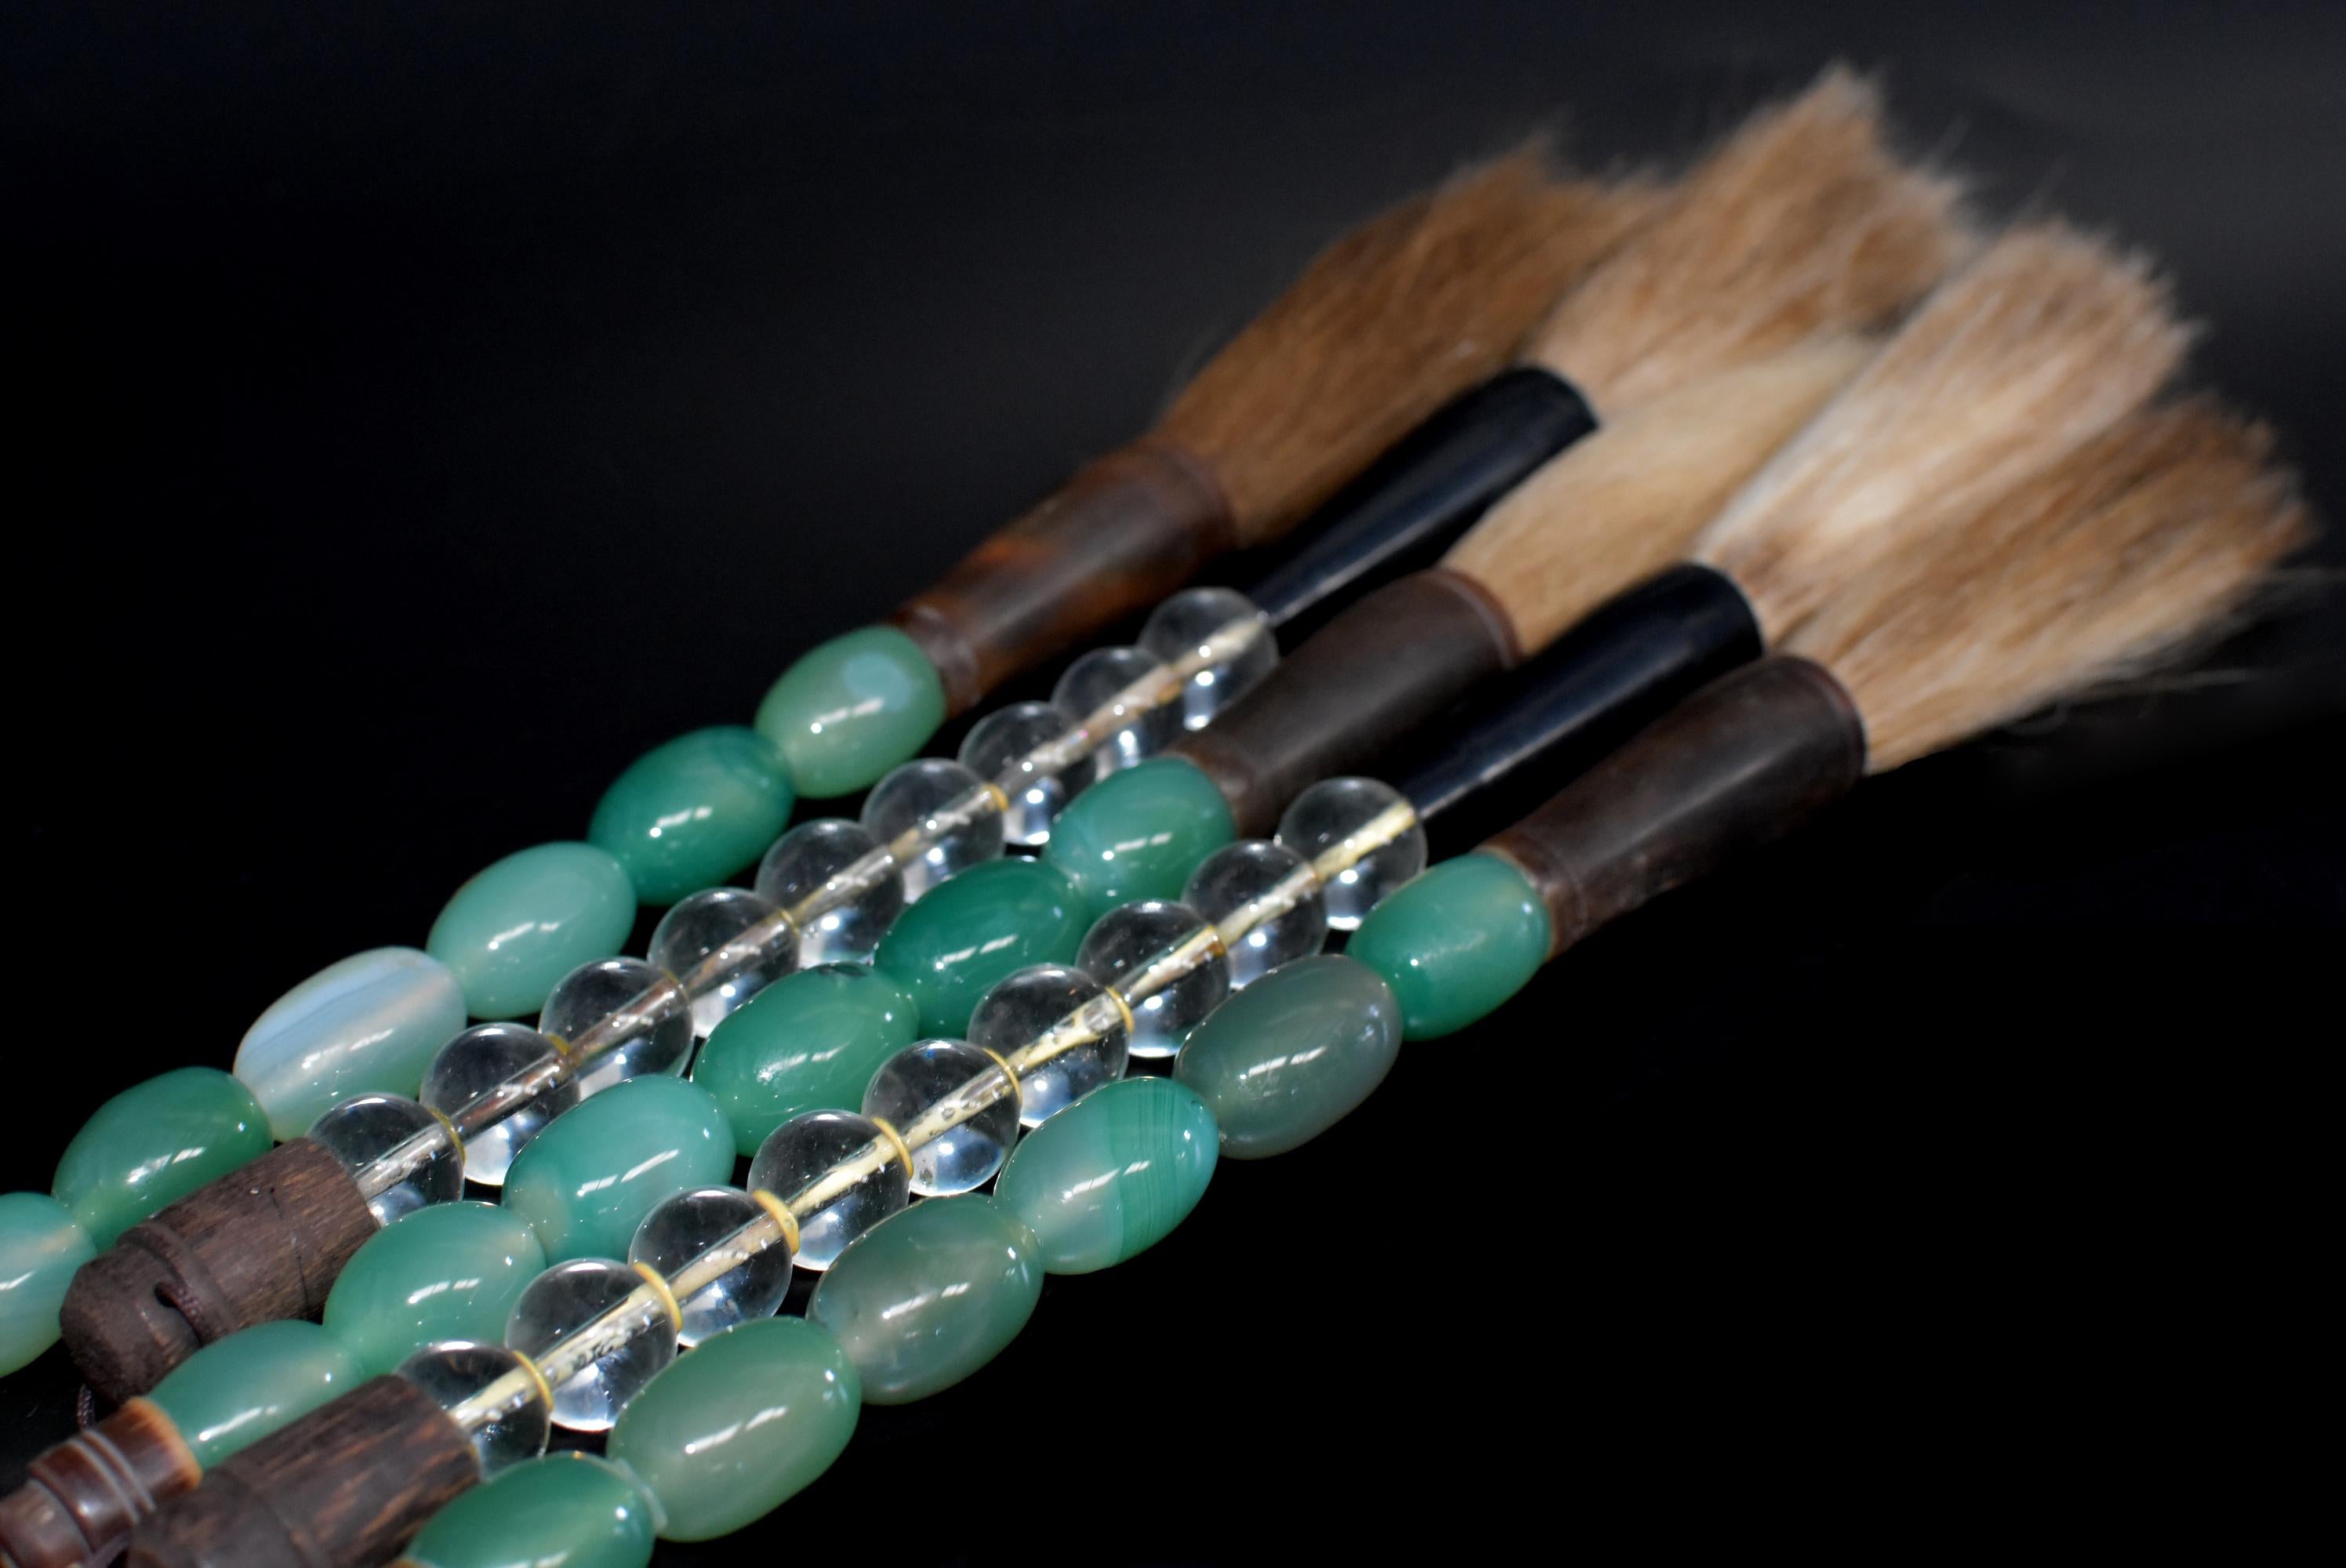 Calligraphy Brush Set of 5 with Glass Beads and Horn Ferrules 7